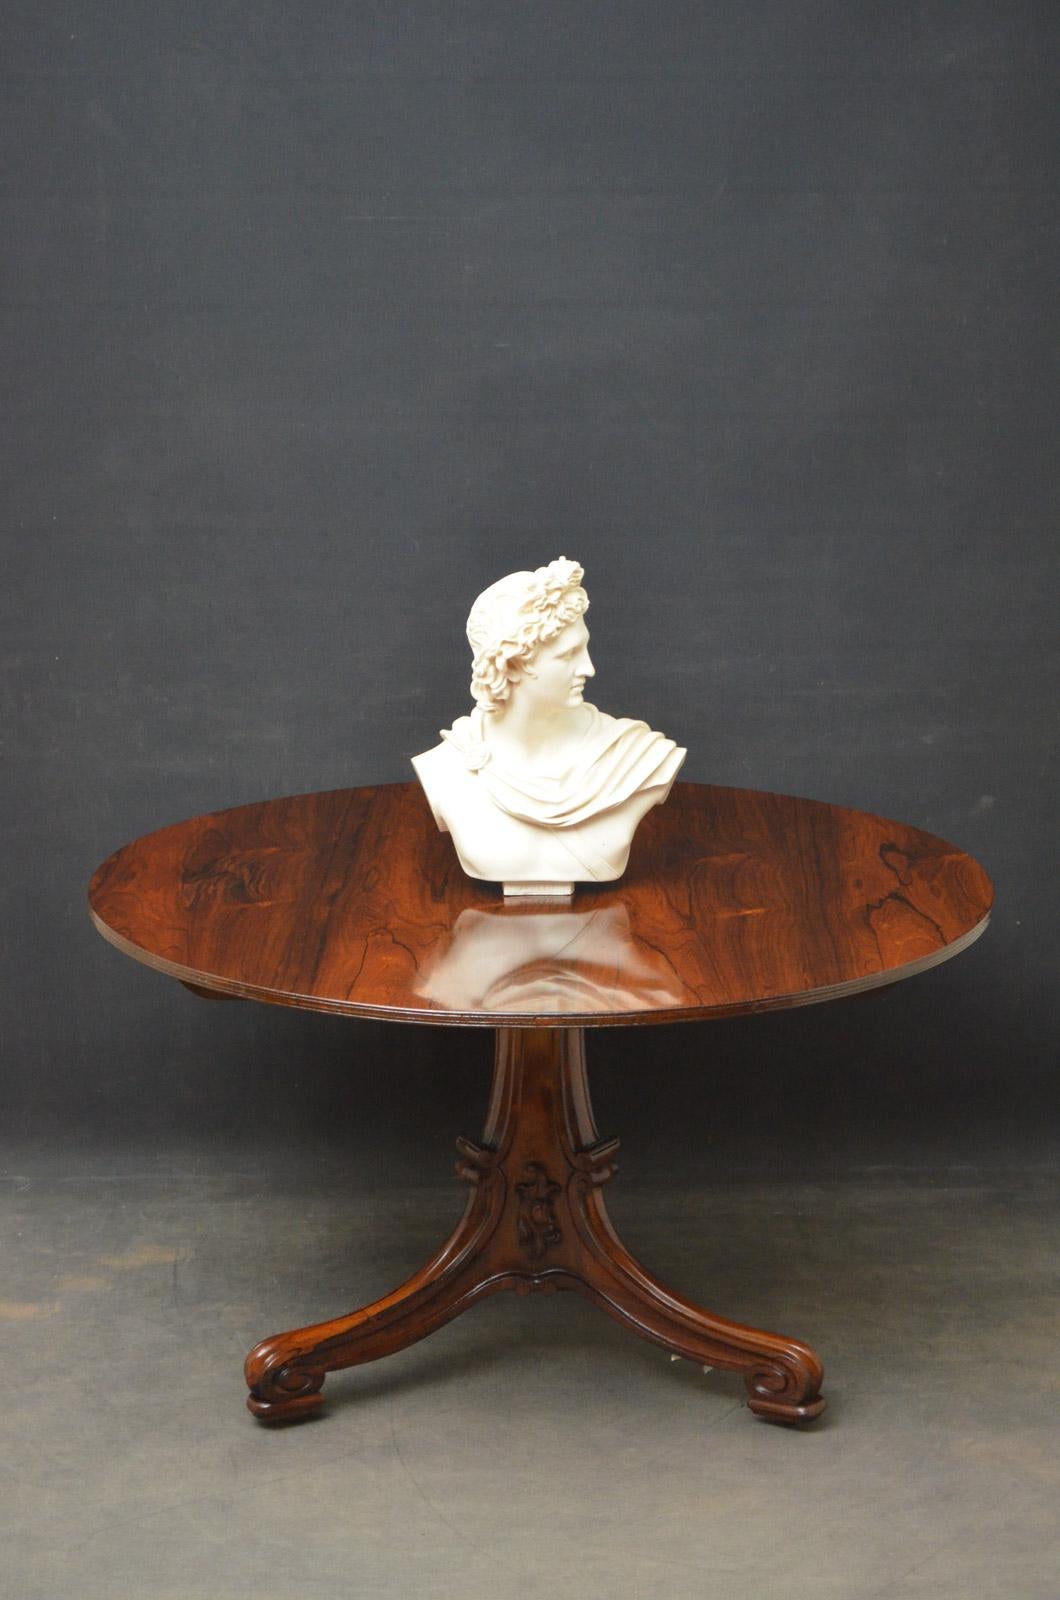 Sn4568a fine quality and very attractive William IV dining table in rosewood, having stunning grain to the tilt-top and finely carved pedestal base terminating in 3 scrolled legs and original brass castors.
This antique centre table has been